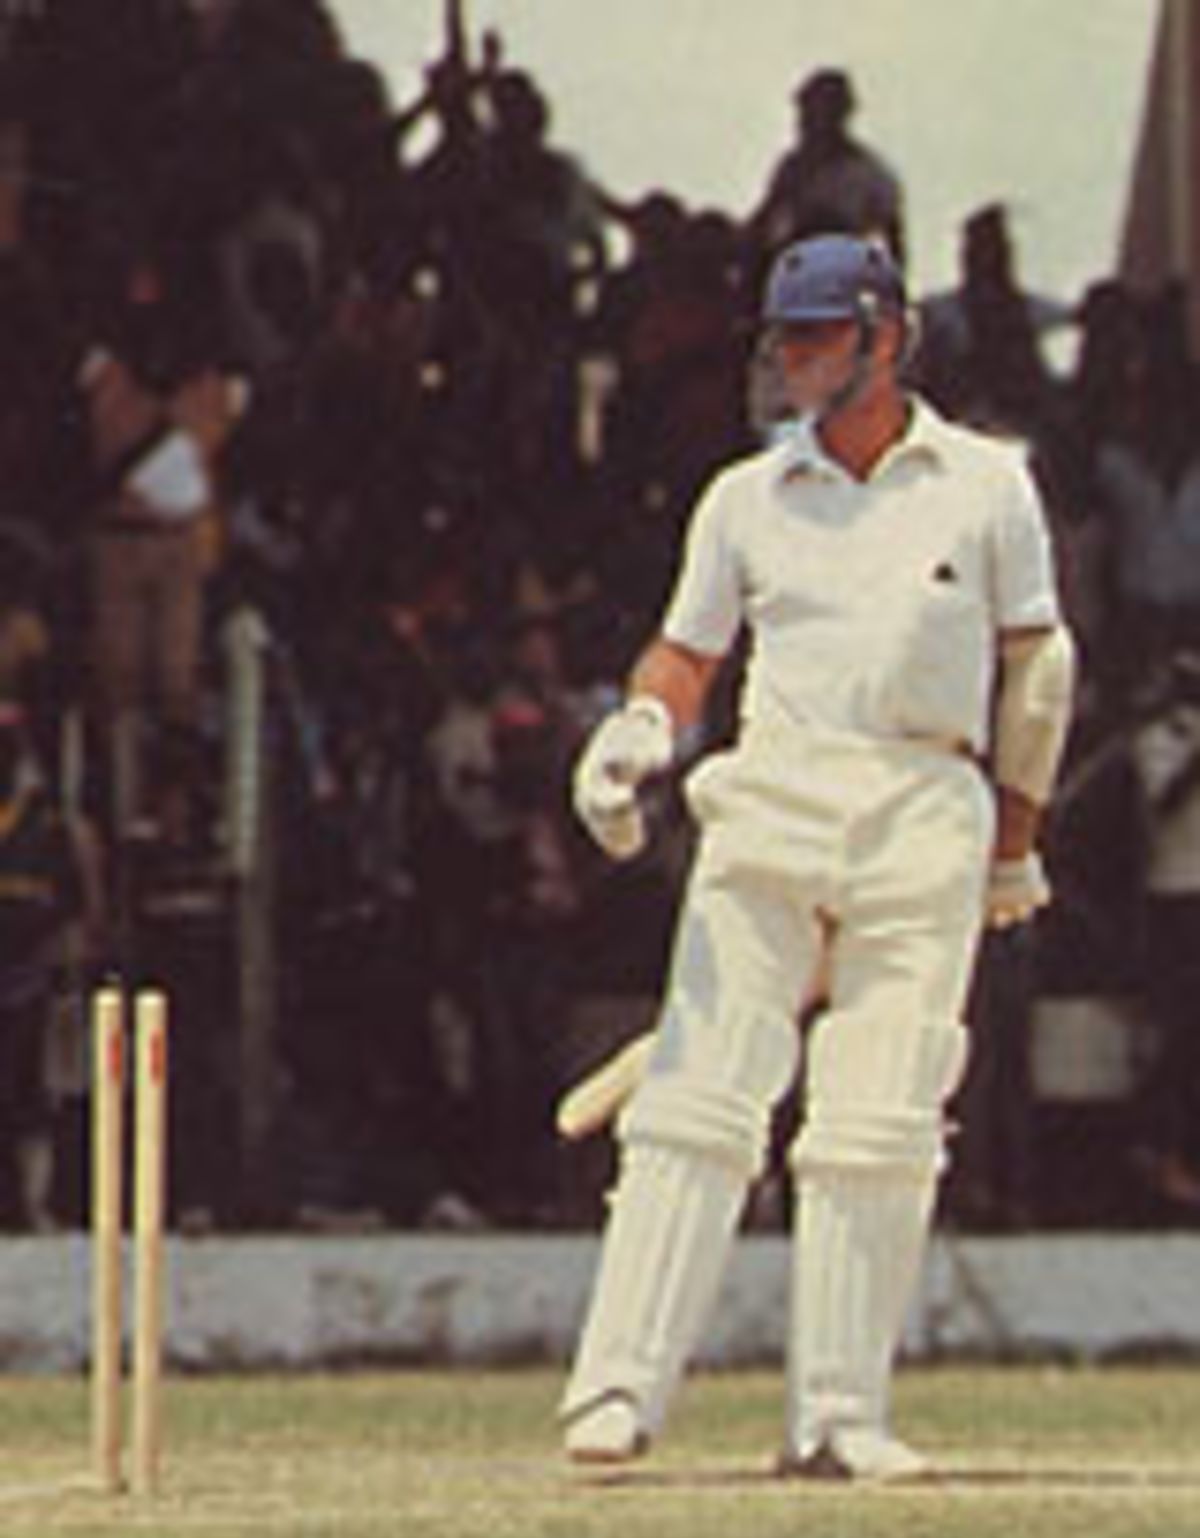 Geoff Boycott bowled by Michael Holding for 0, West Indies v England, 3rd Test, Barbados, March 14, 1981